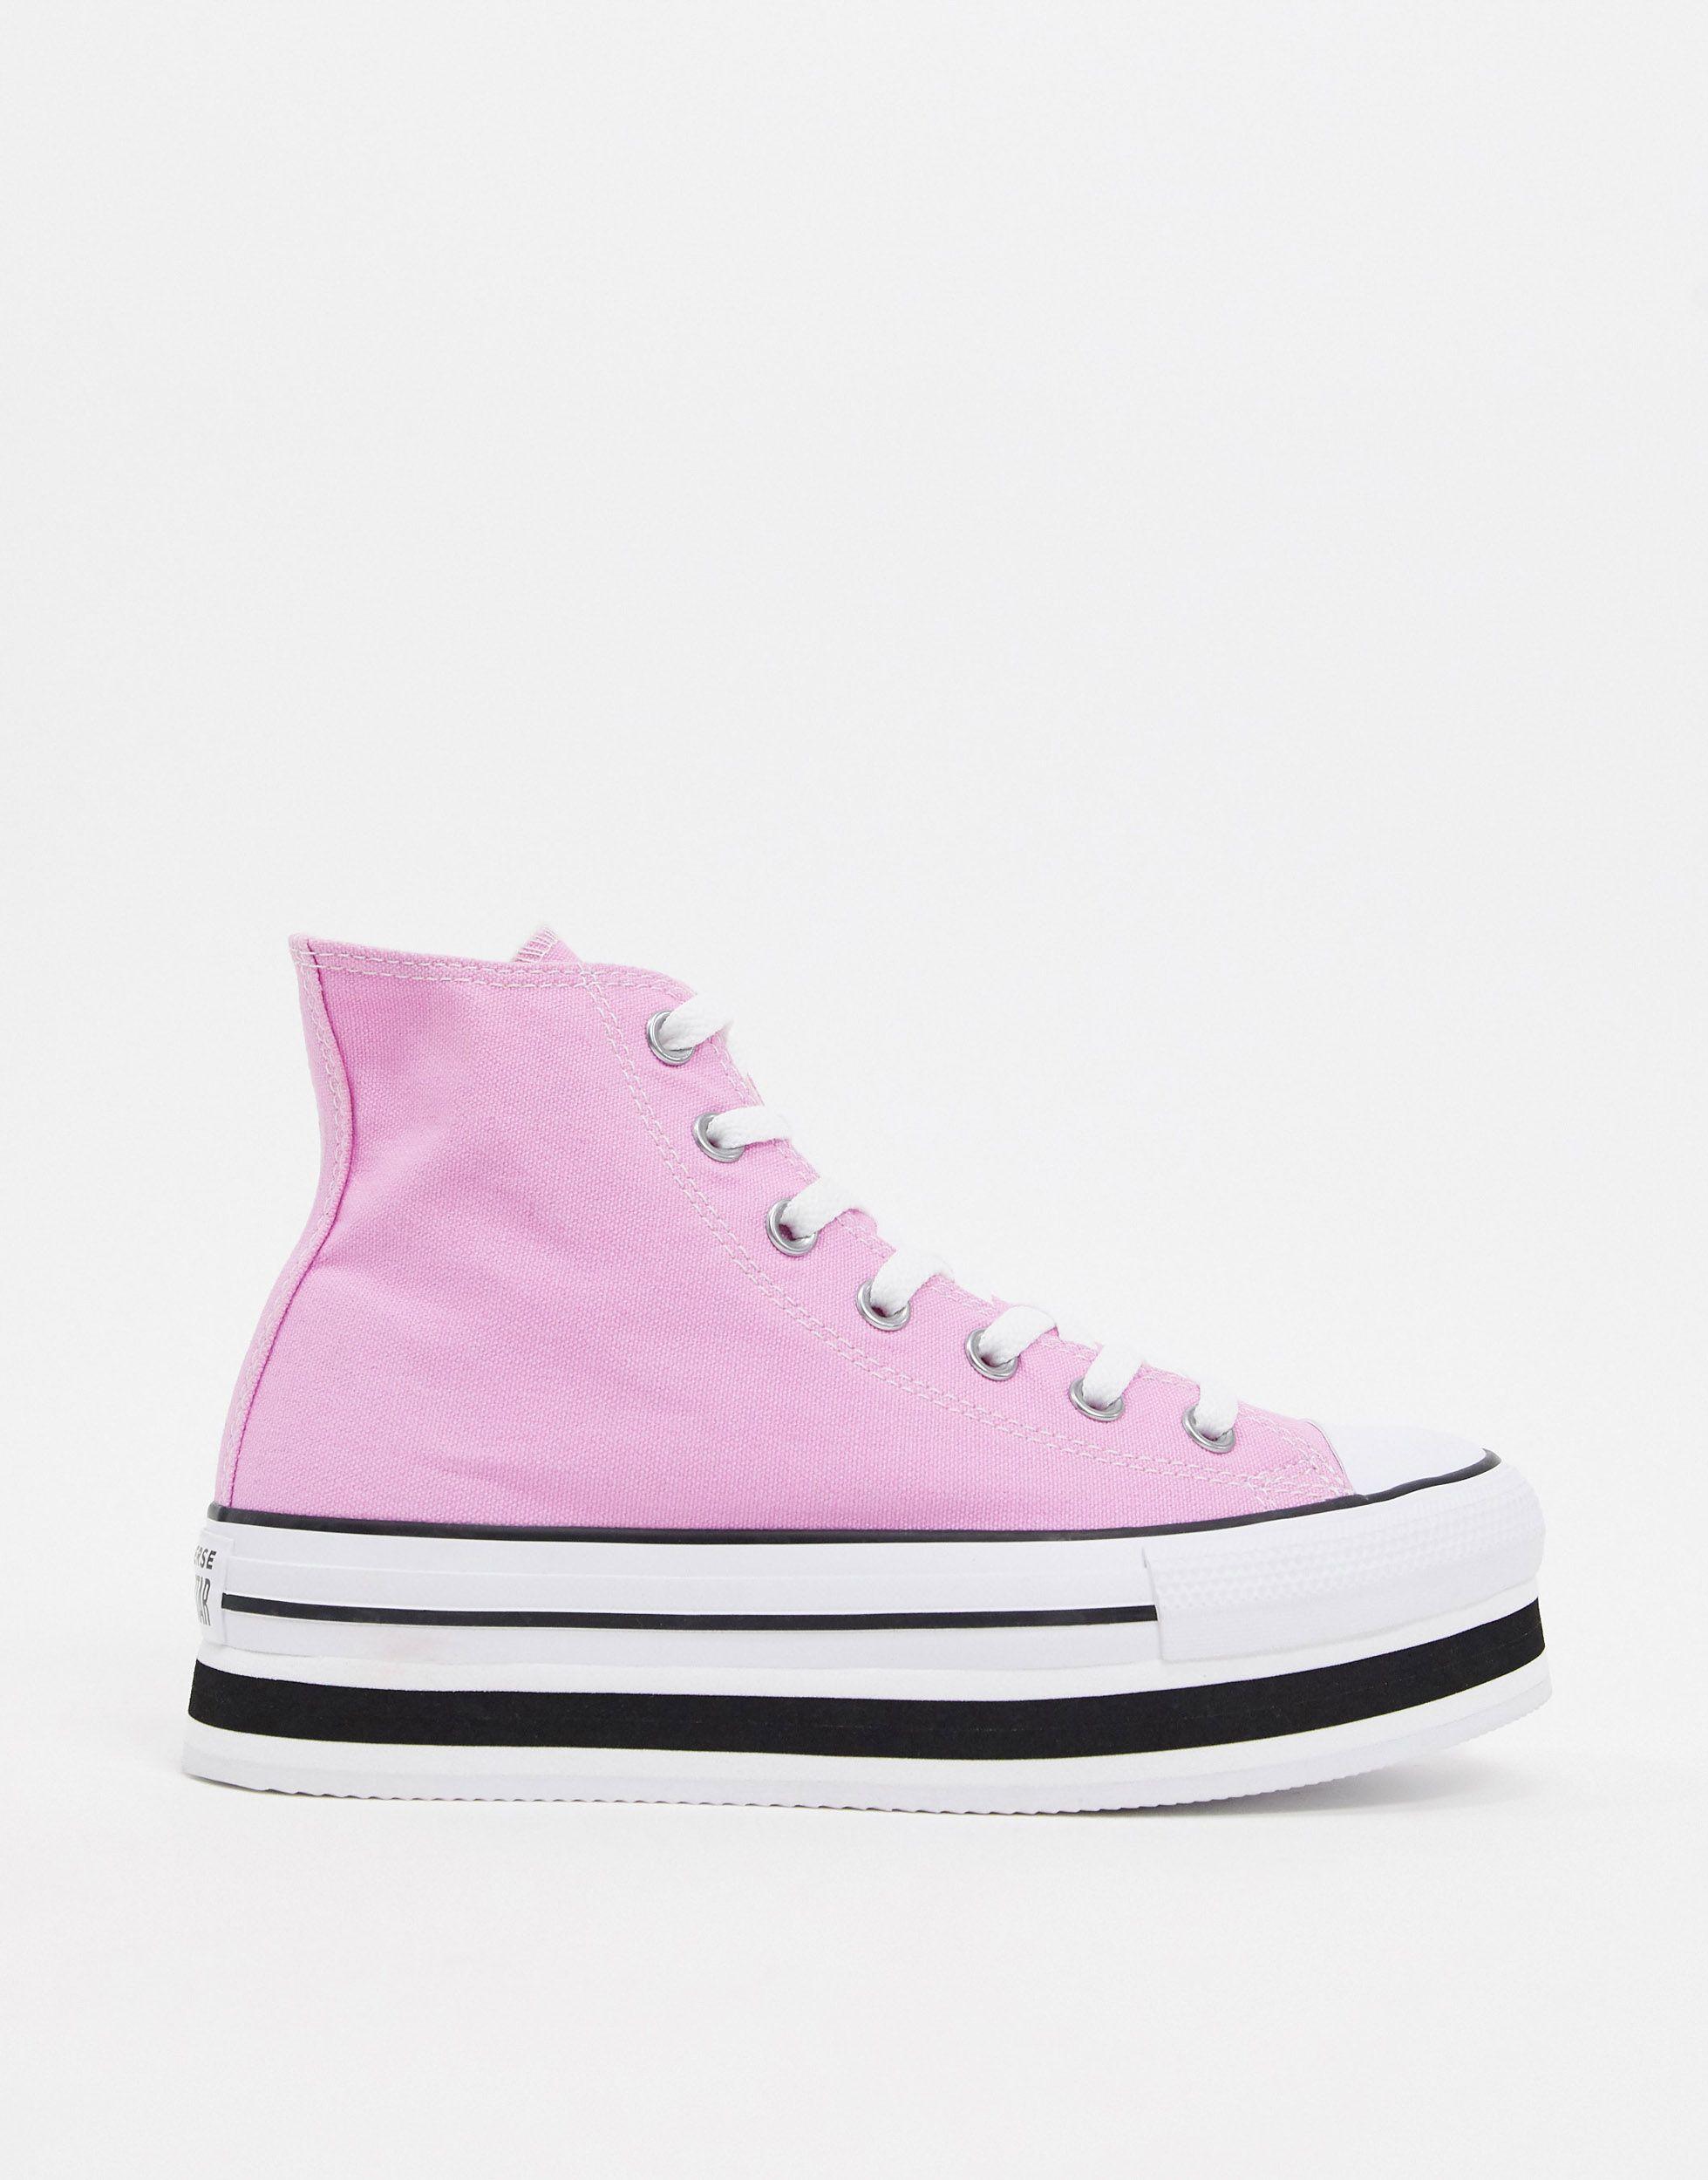 Converse Rubber Chuck Taylor Hi Layer Flatform Pink Sneakers | Lyst